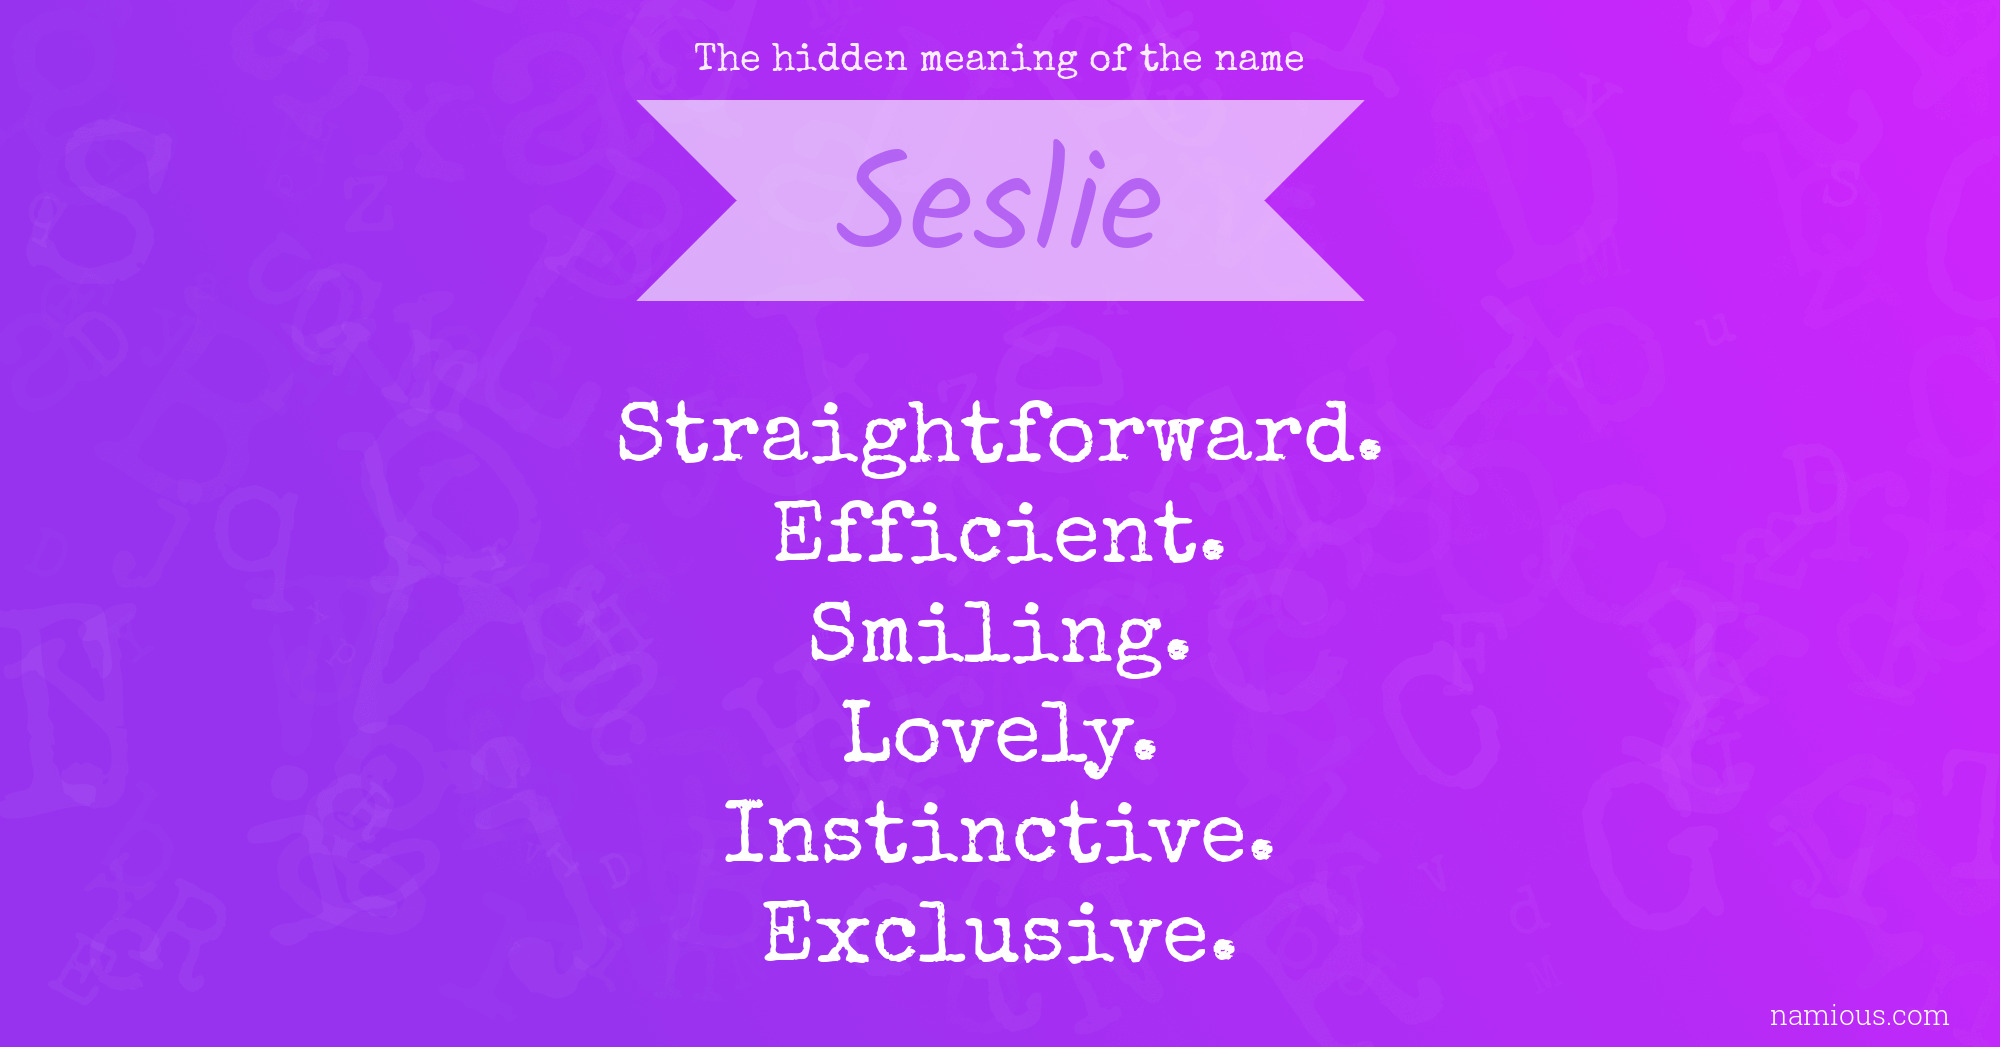 The hidden meaning of the name Seslie